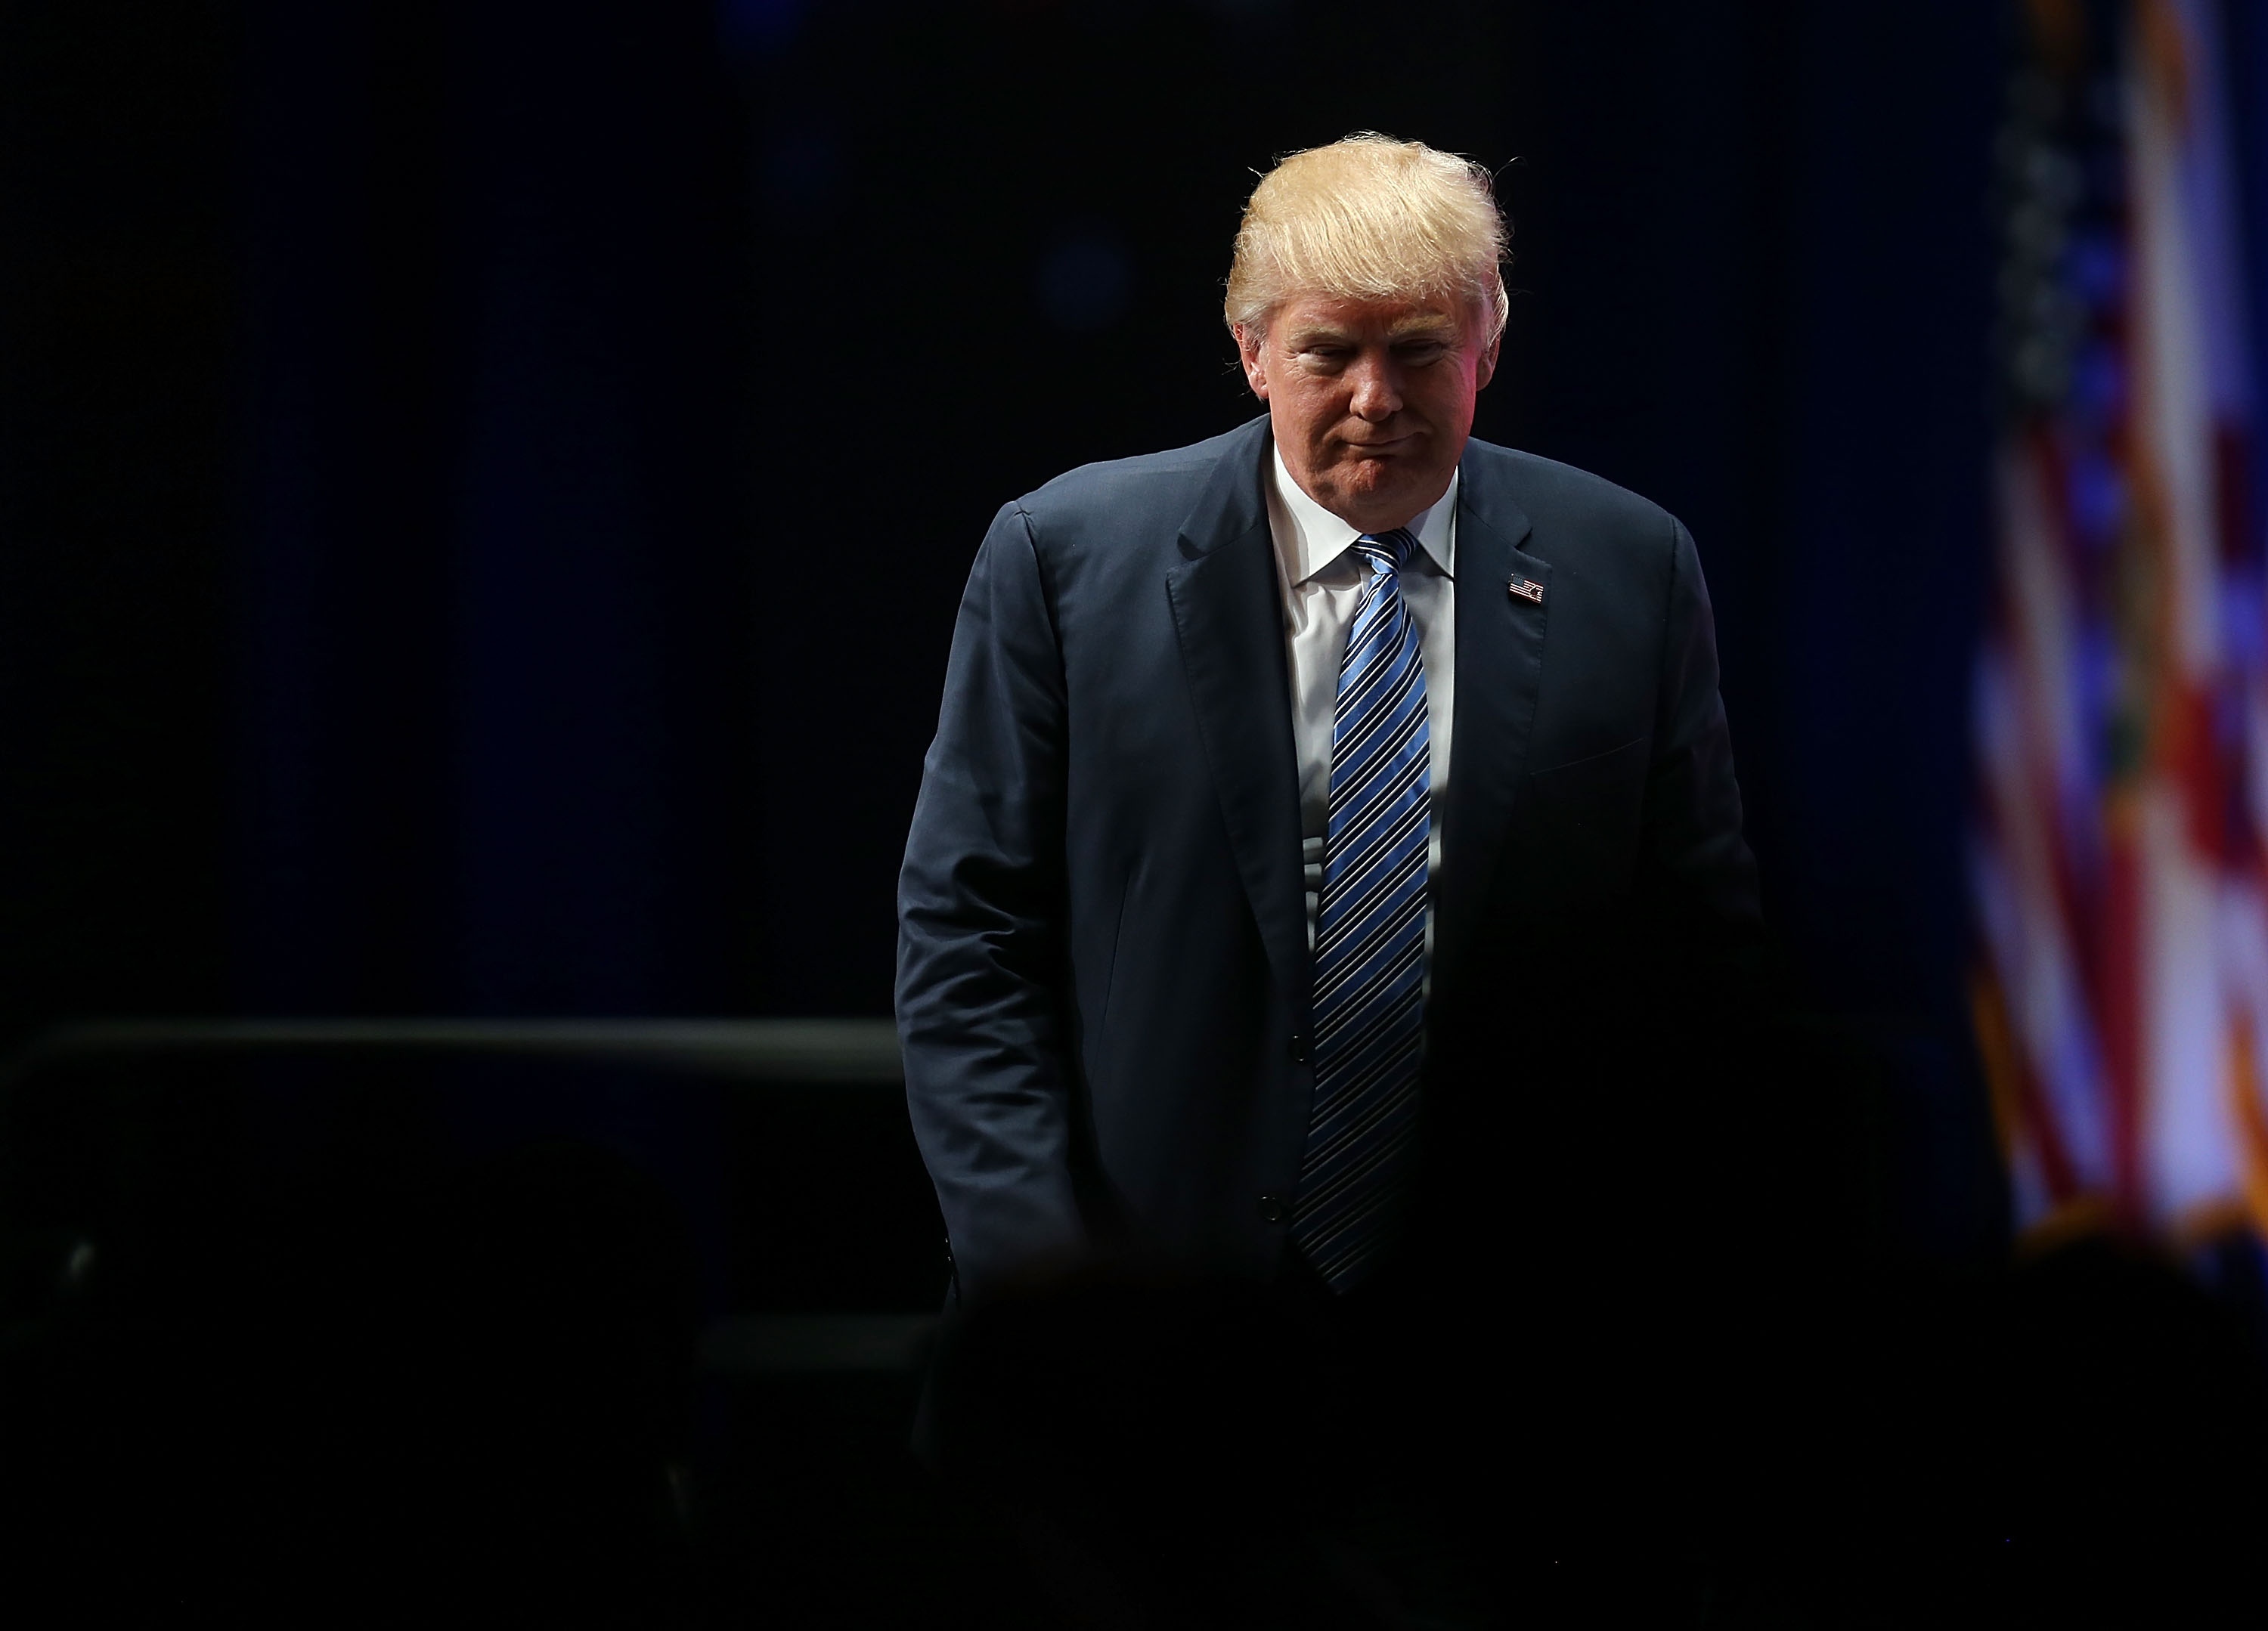 Donald Trump at the Sunshine Summit conference on Nov. 13, 2015 in Orlando, Fl. (Joe Raedle—Getty Images)